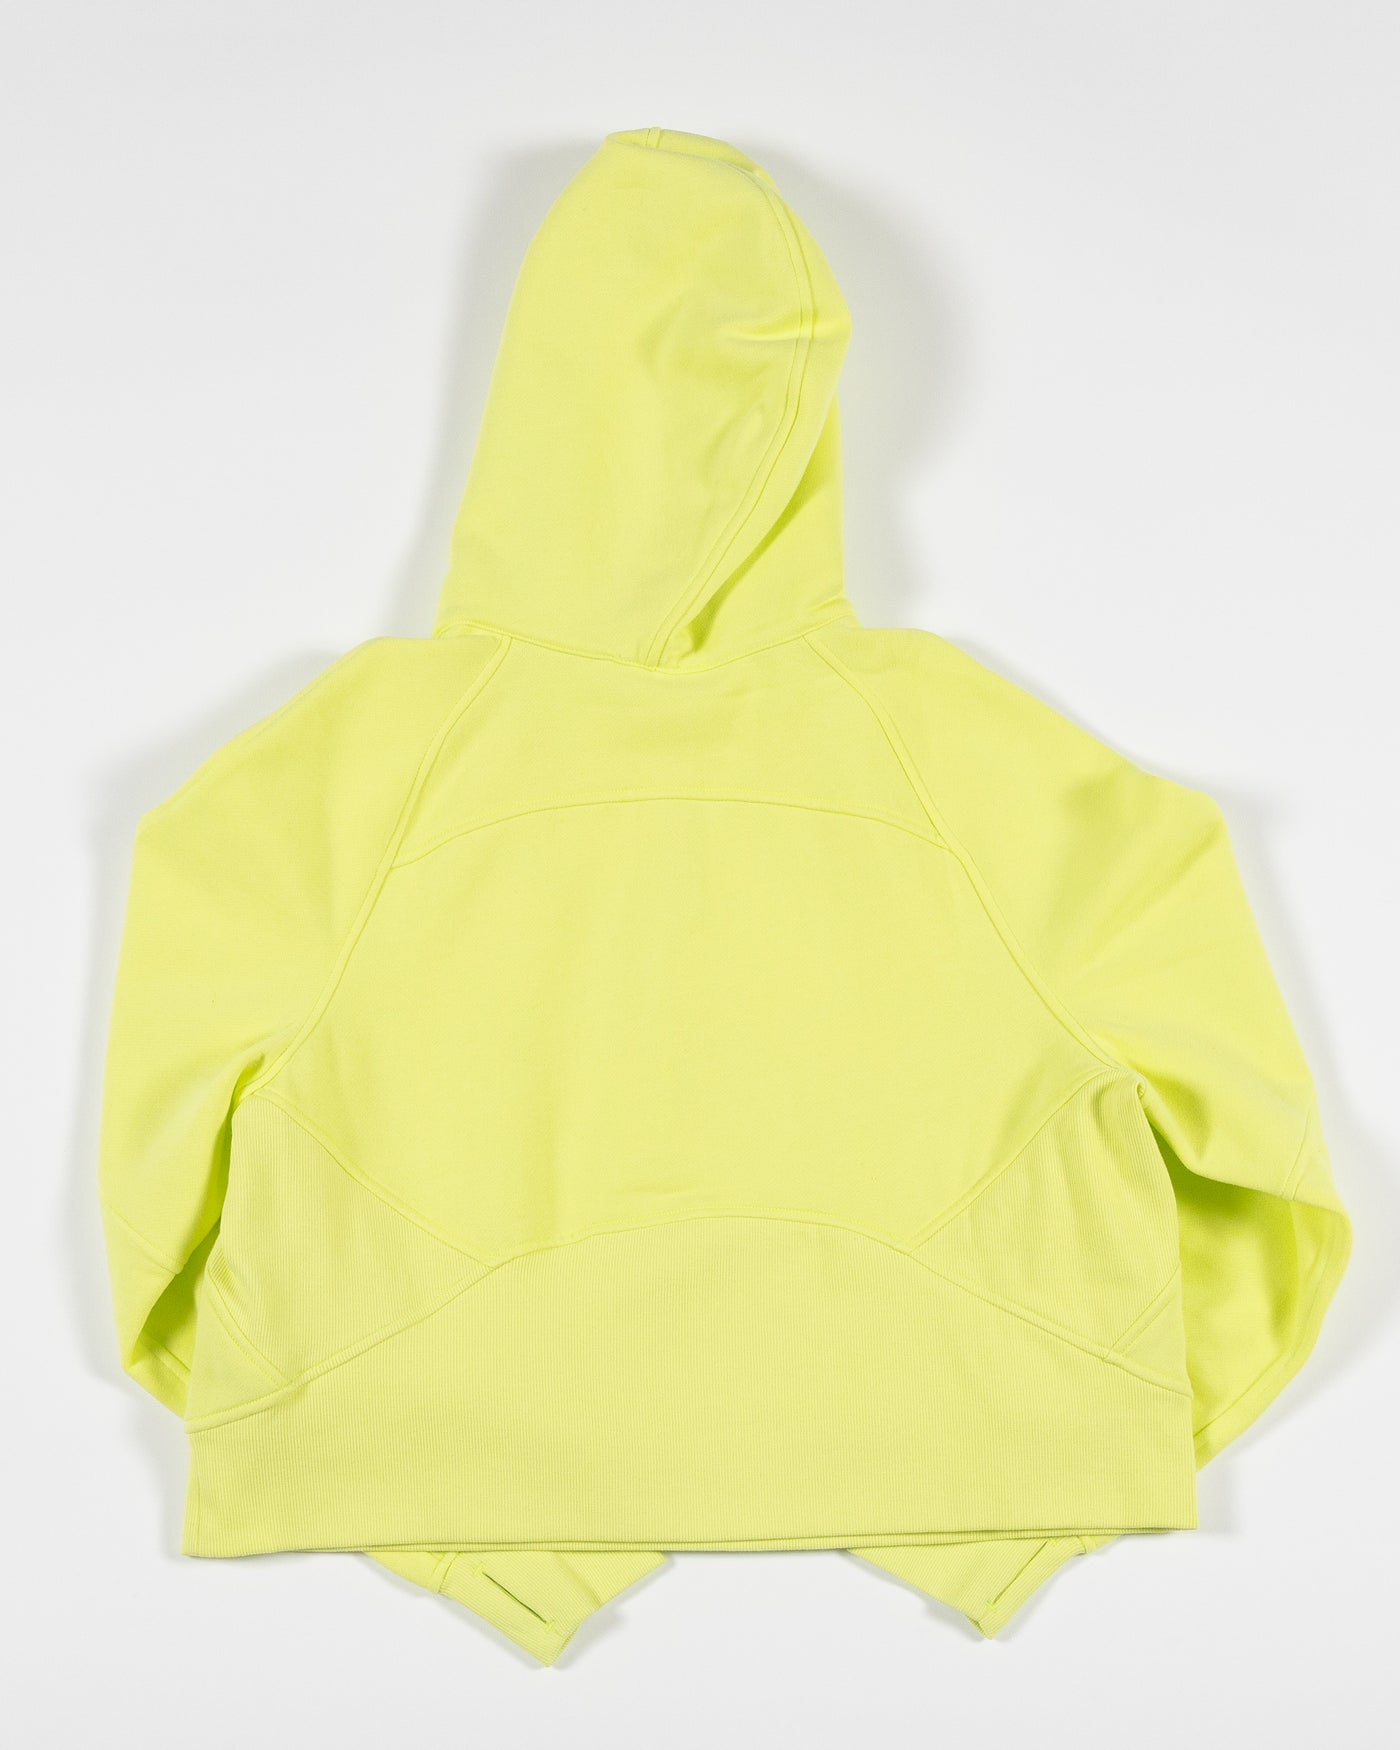 bright yellow lululemon half zip hoodie with Chicago Blackhawks logo embroidered on left chest - back lay flat